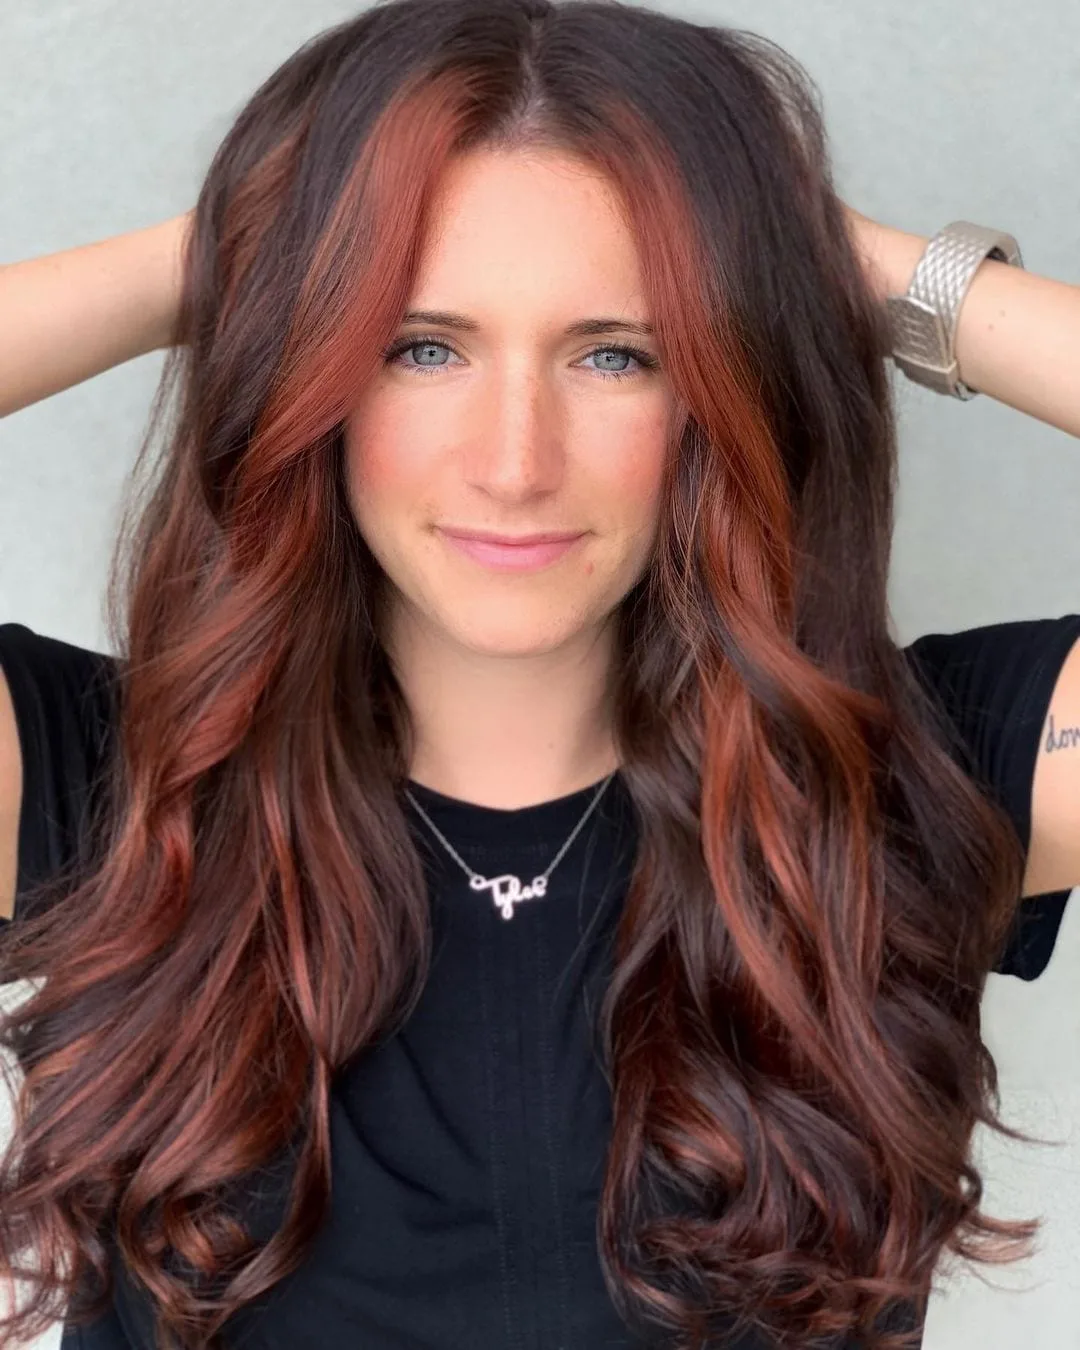 Woman with long, wavy ombre hair stands with her hands on her head